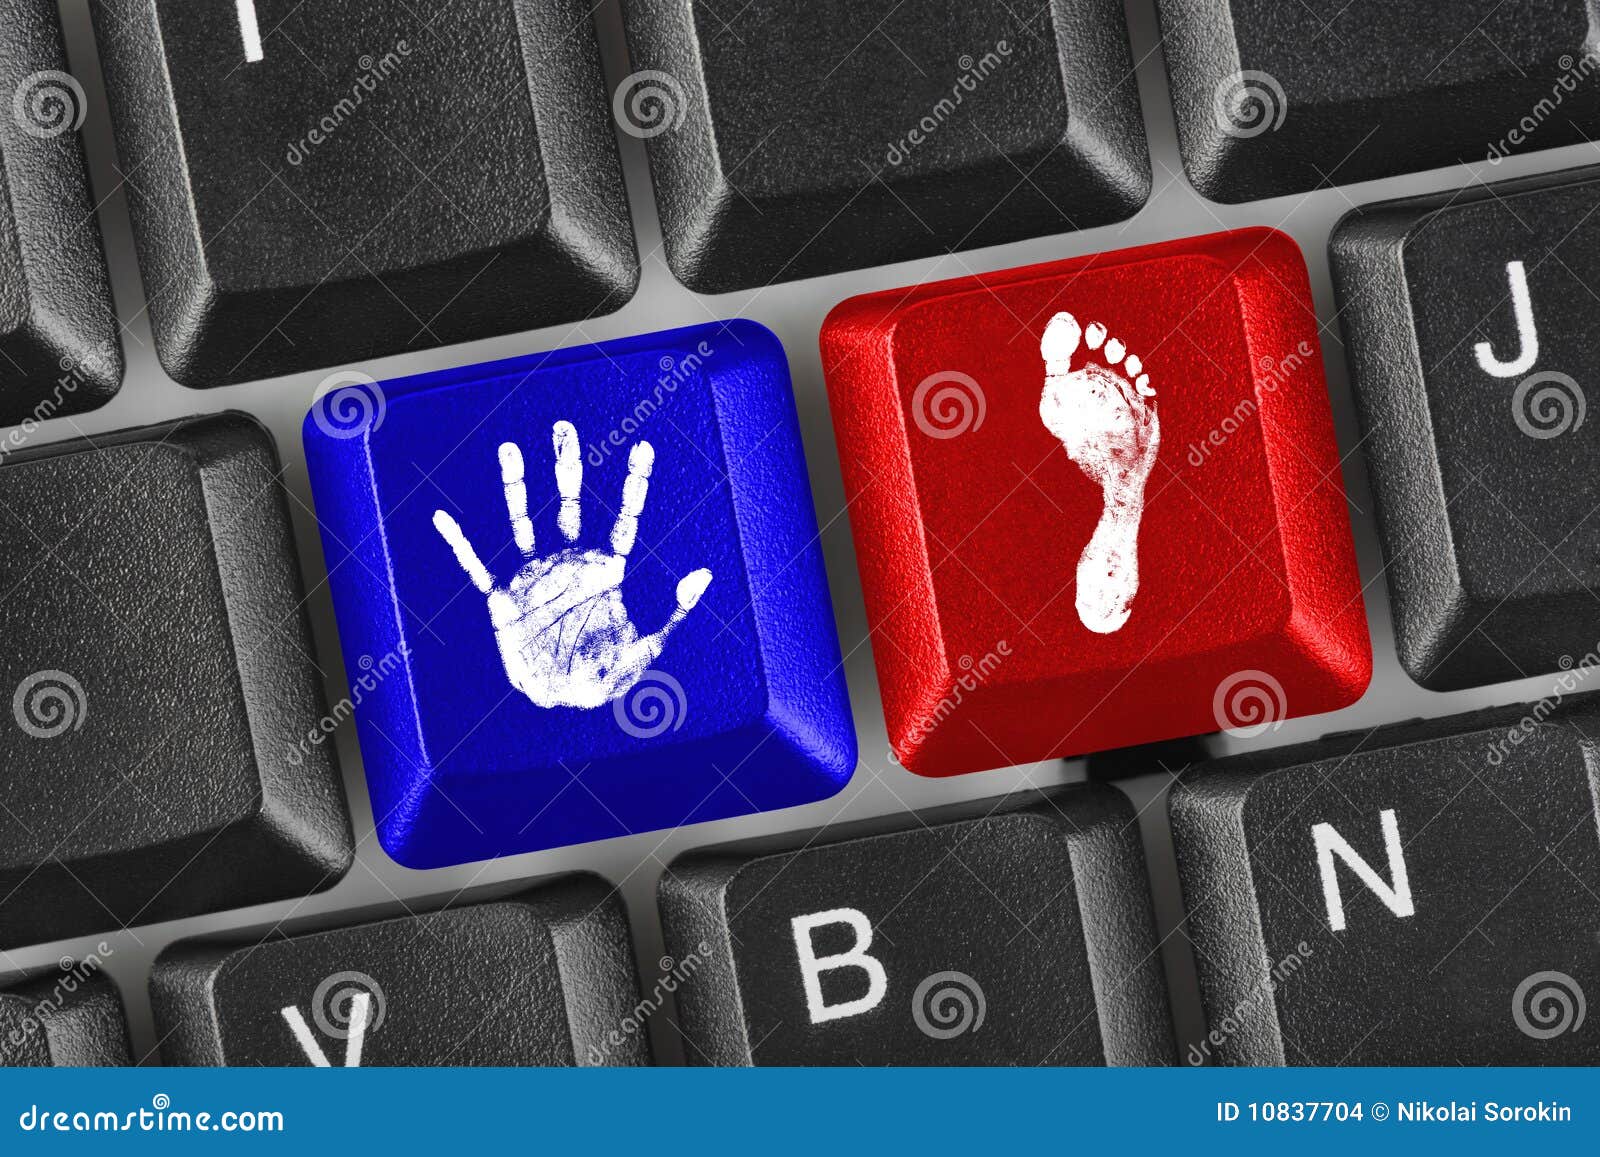 printout of hand and foot on computer keys